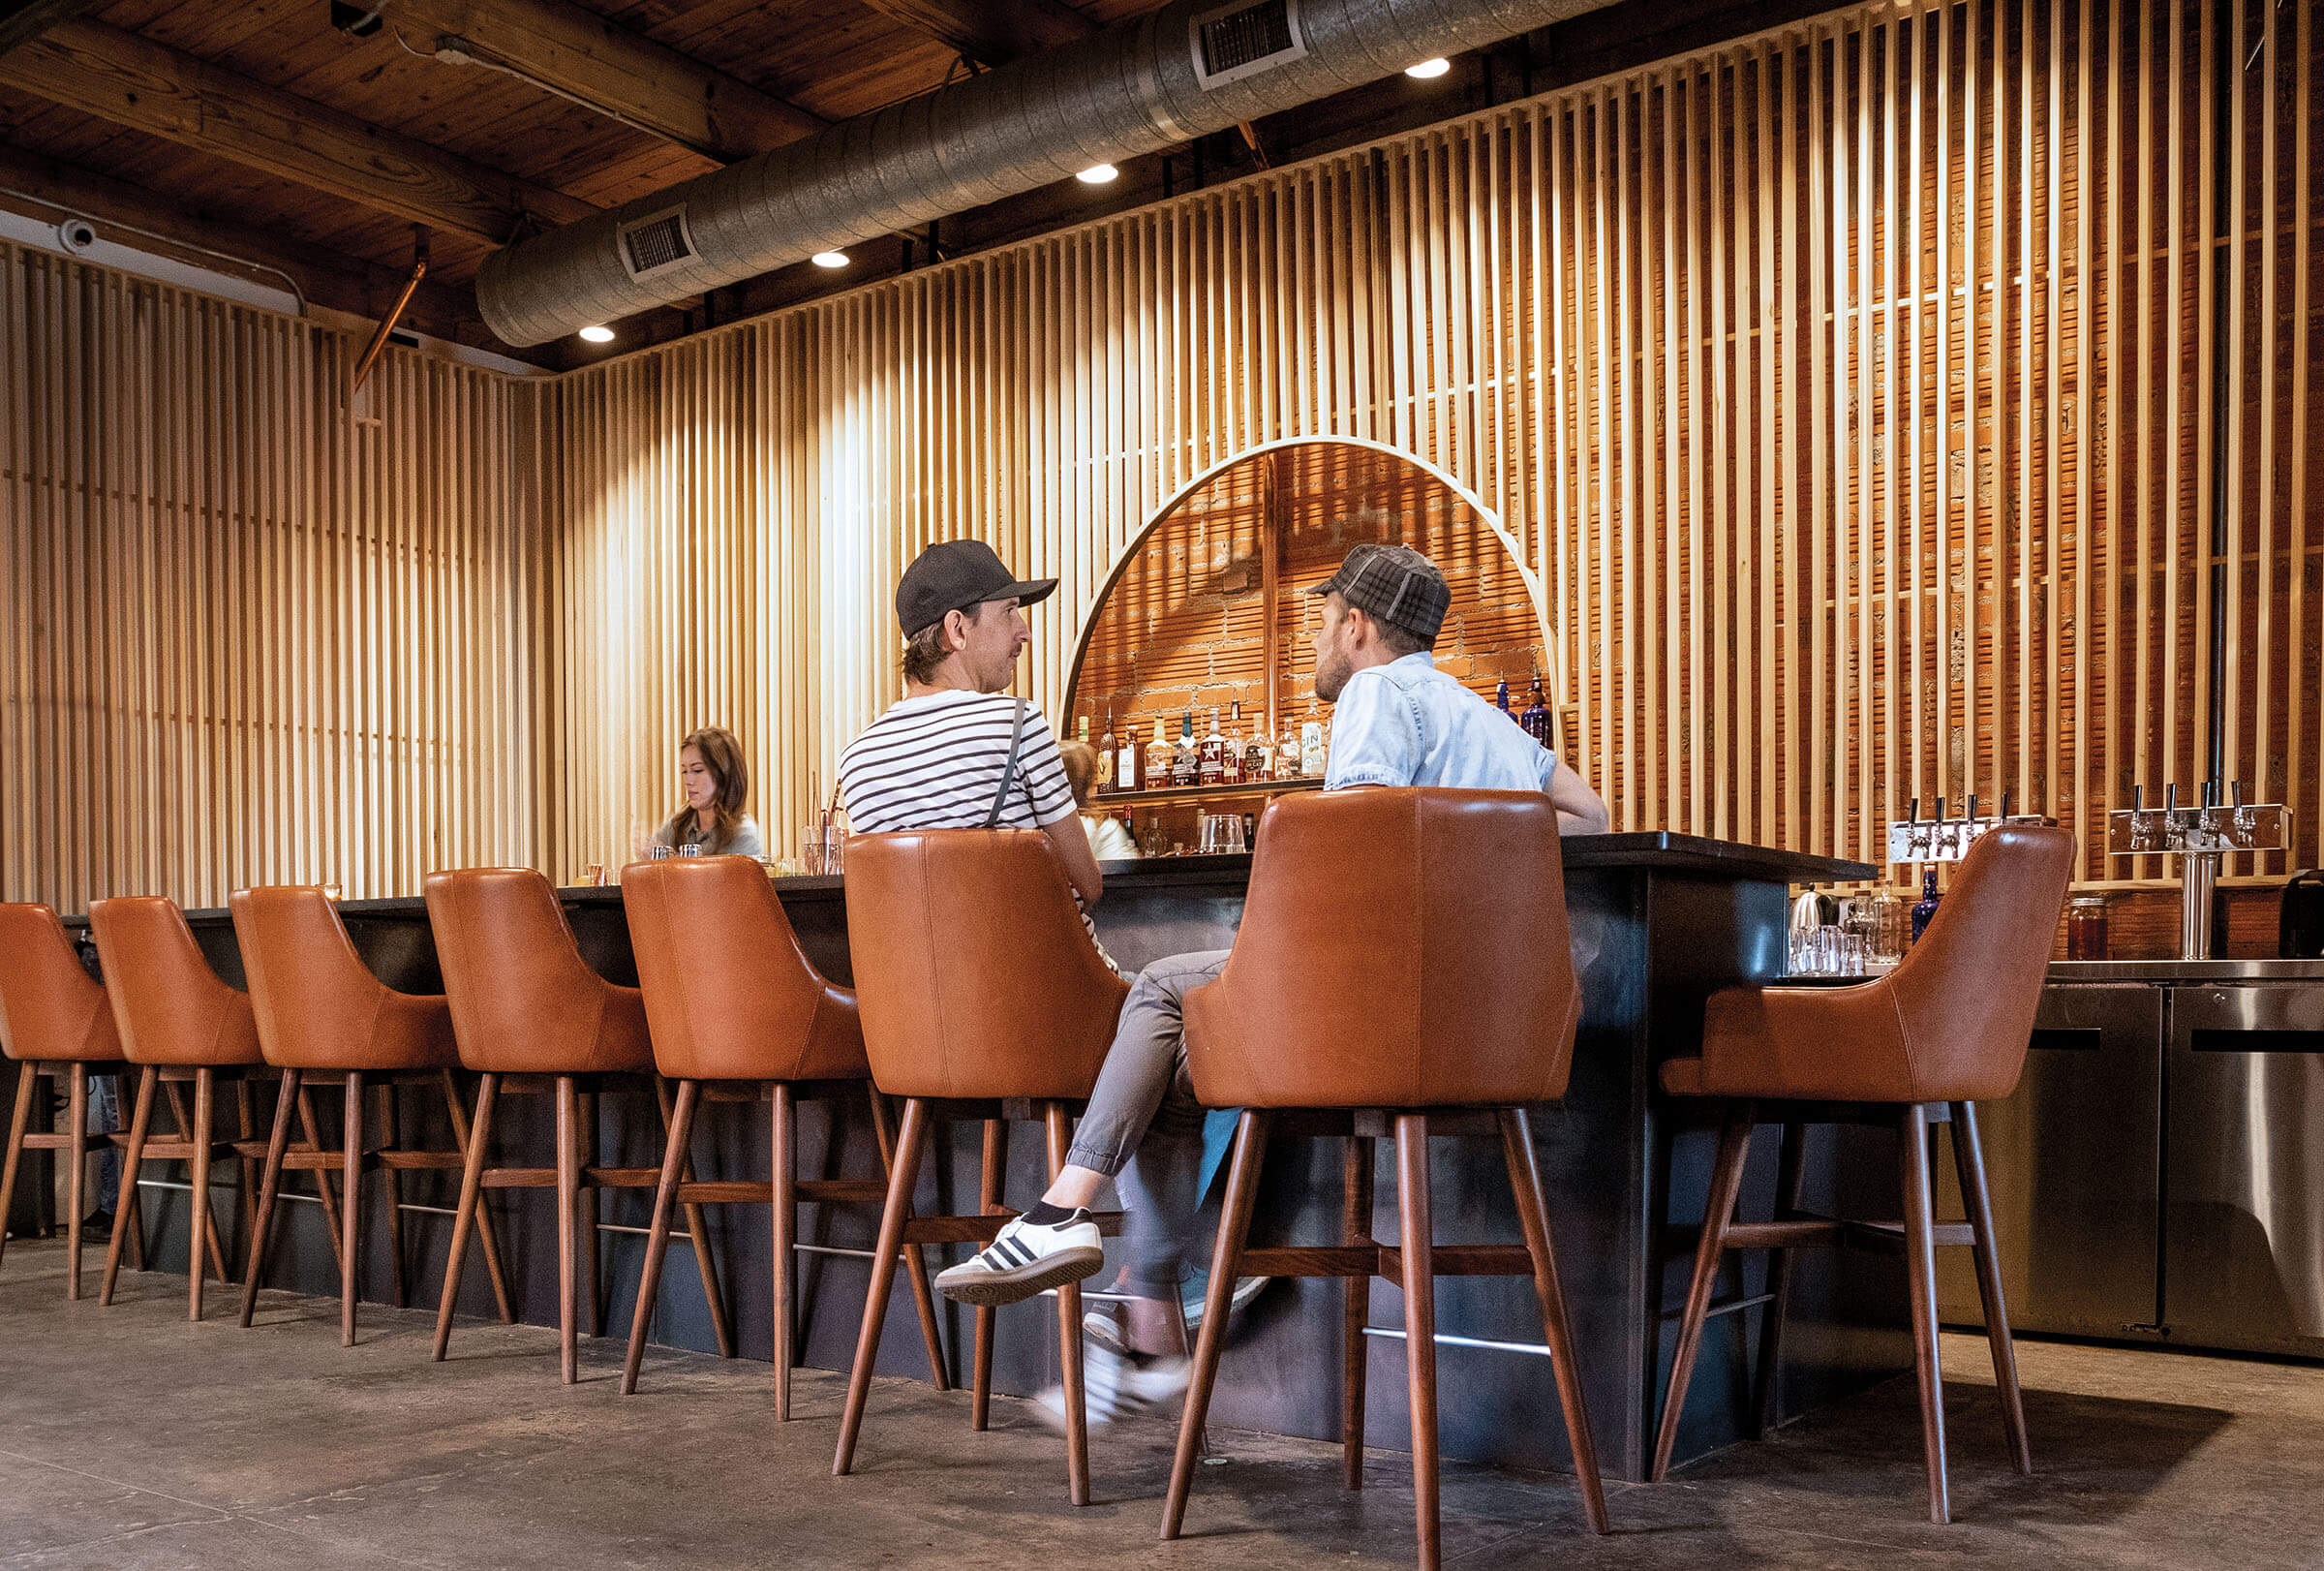 Two people sit in large leather barstools behind a wood-paneled bar